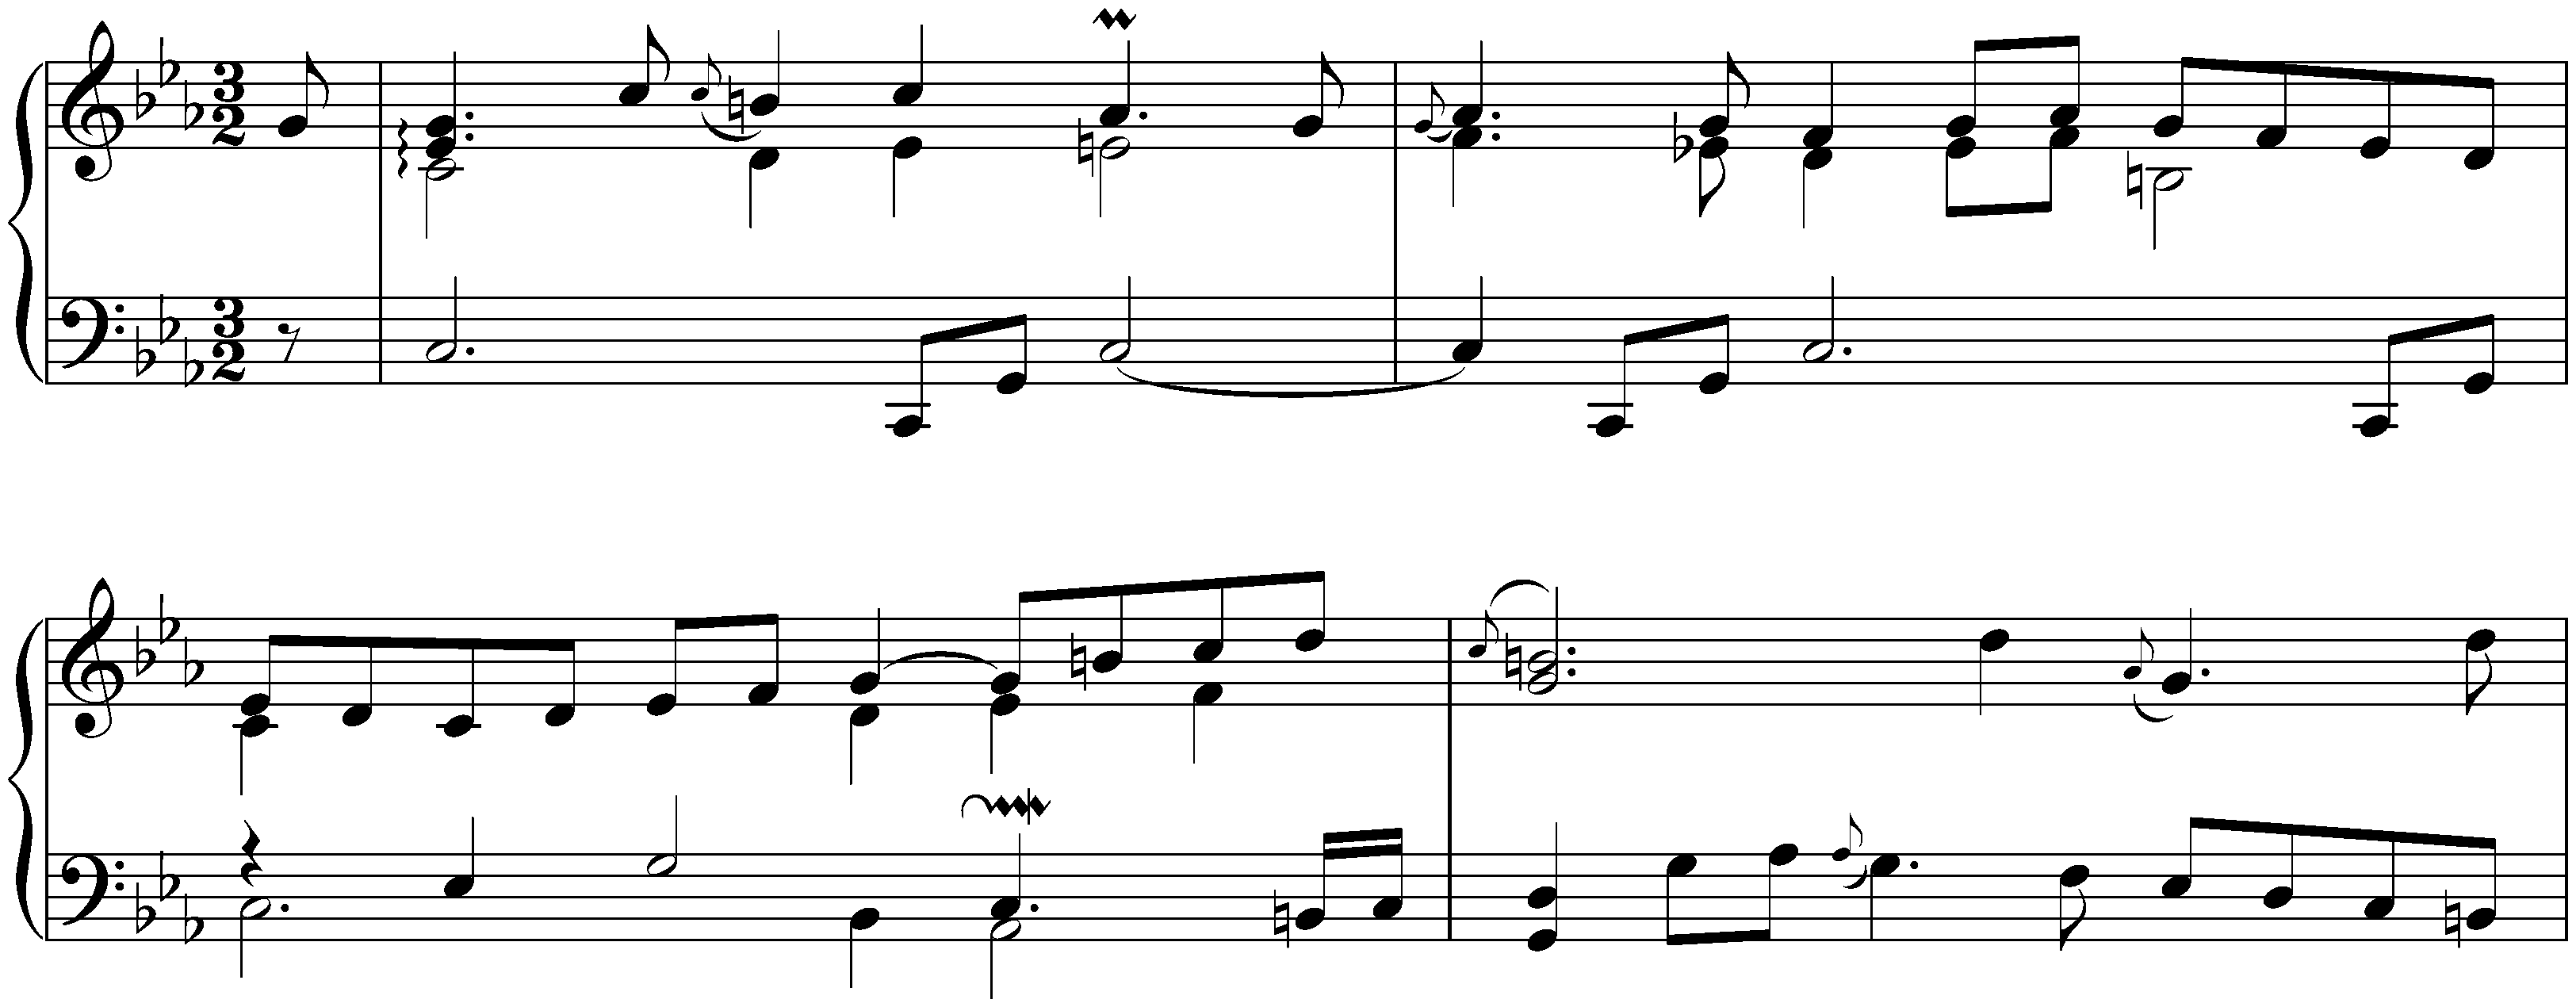 French Overture in C minor, BWV 831 (first version); 2. Courante